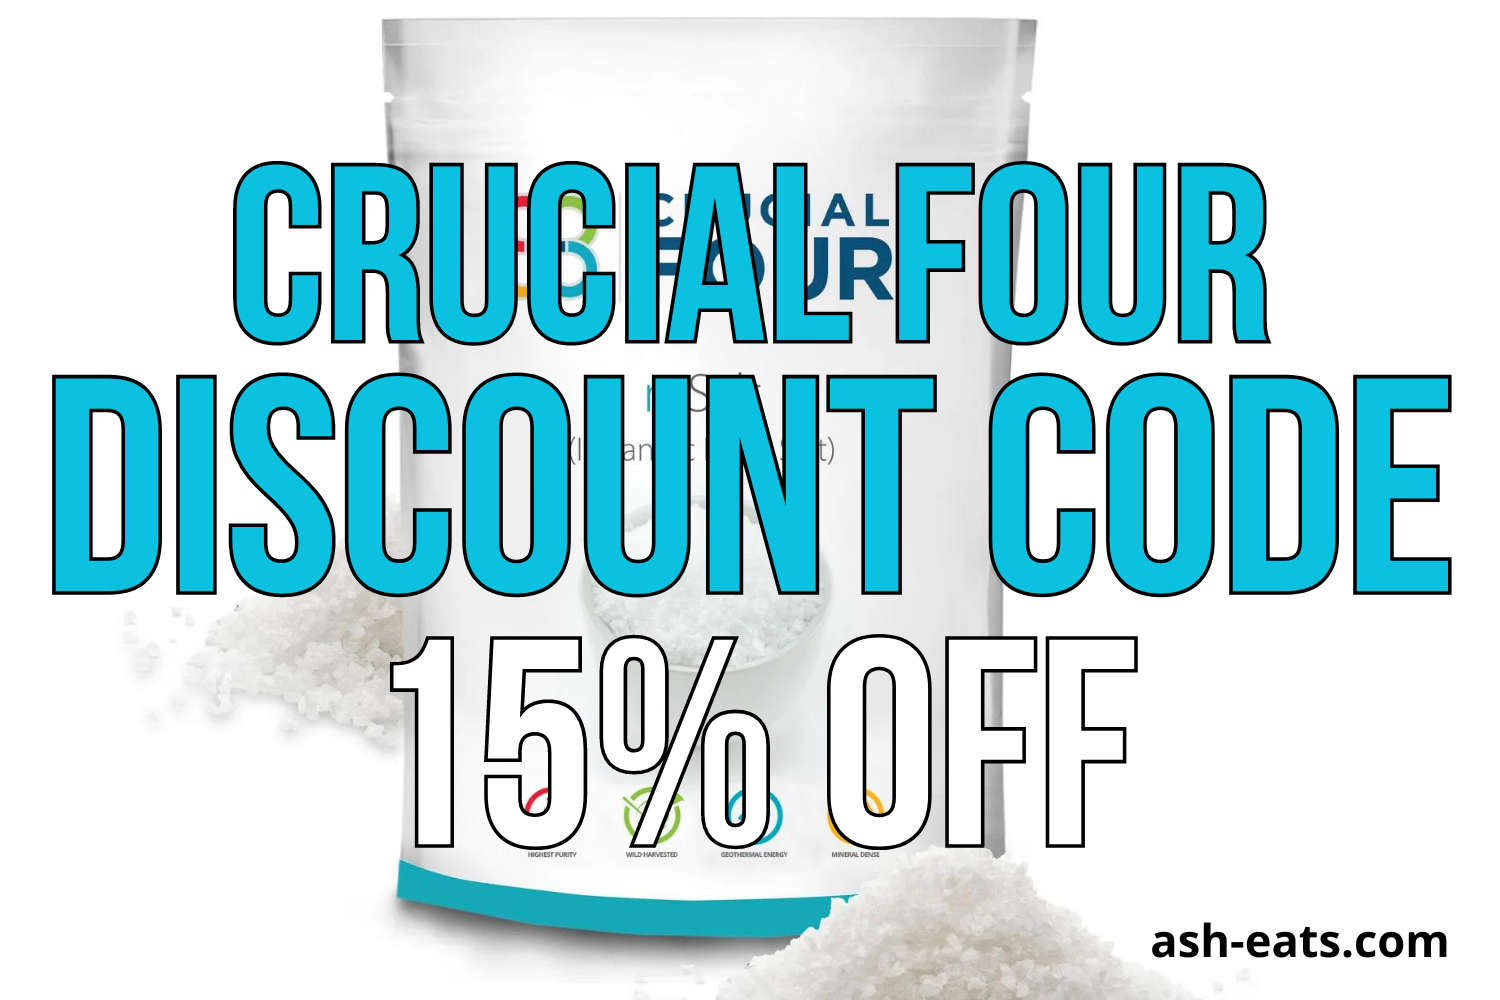 crucial four discount code